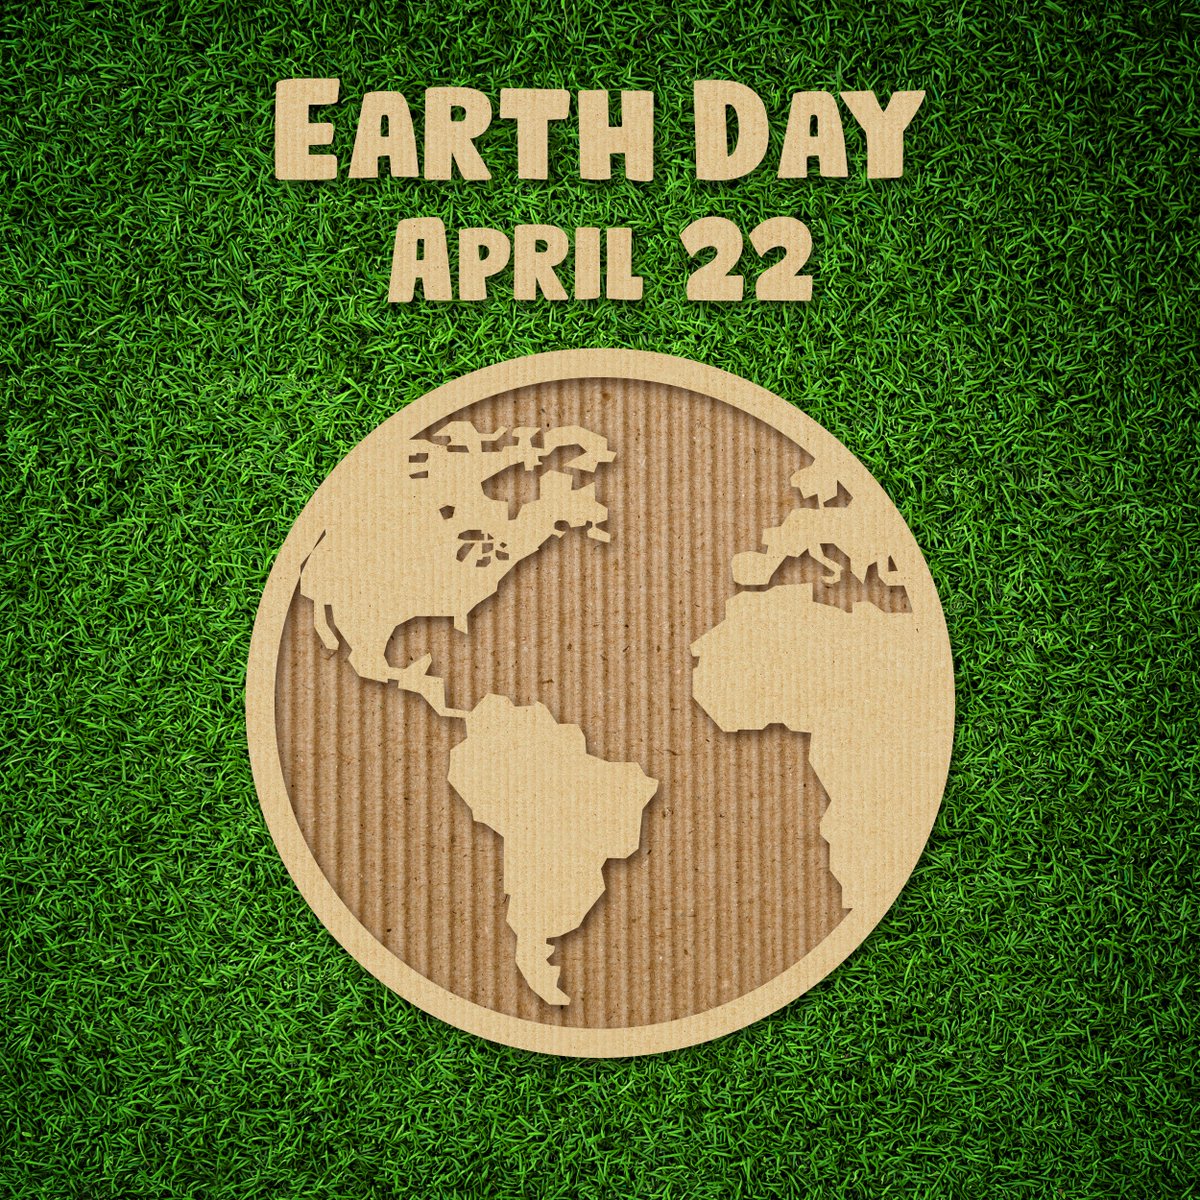 Happy #EarthDay! Join us today for our special programs! queenslibrary.org/search/calenda…